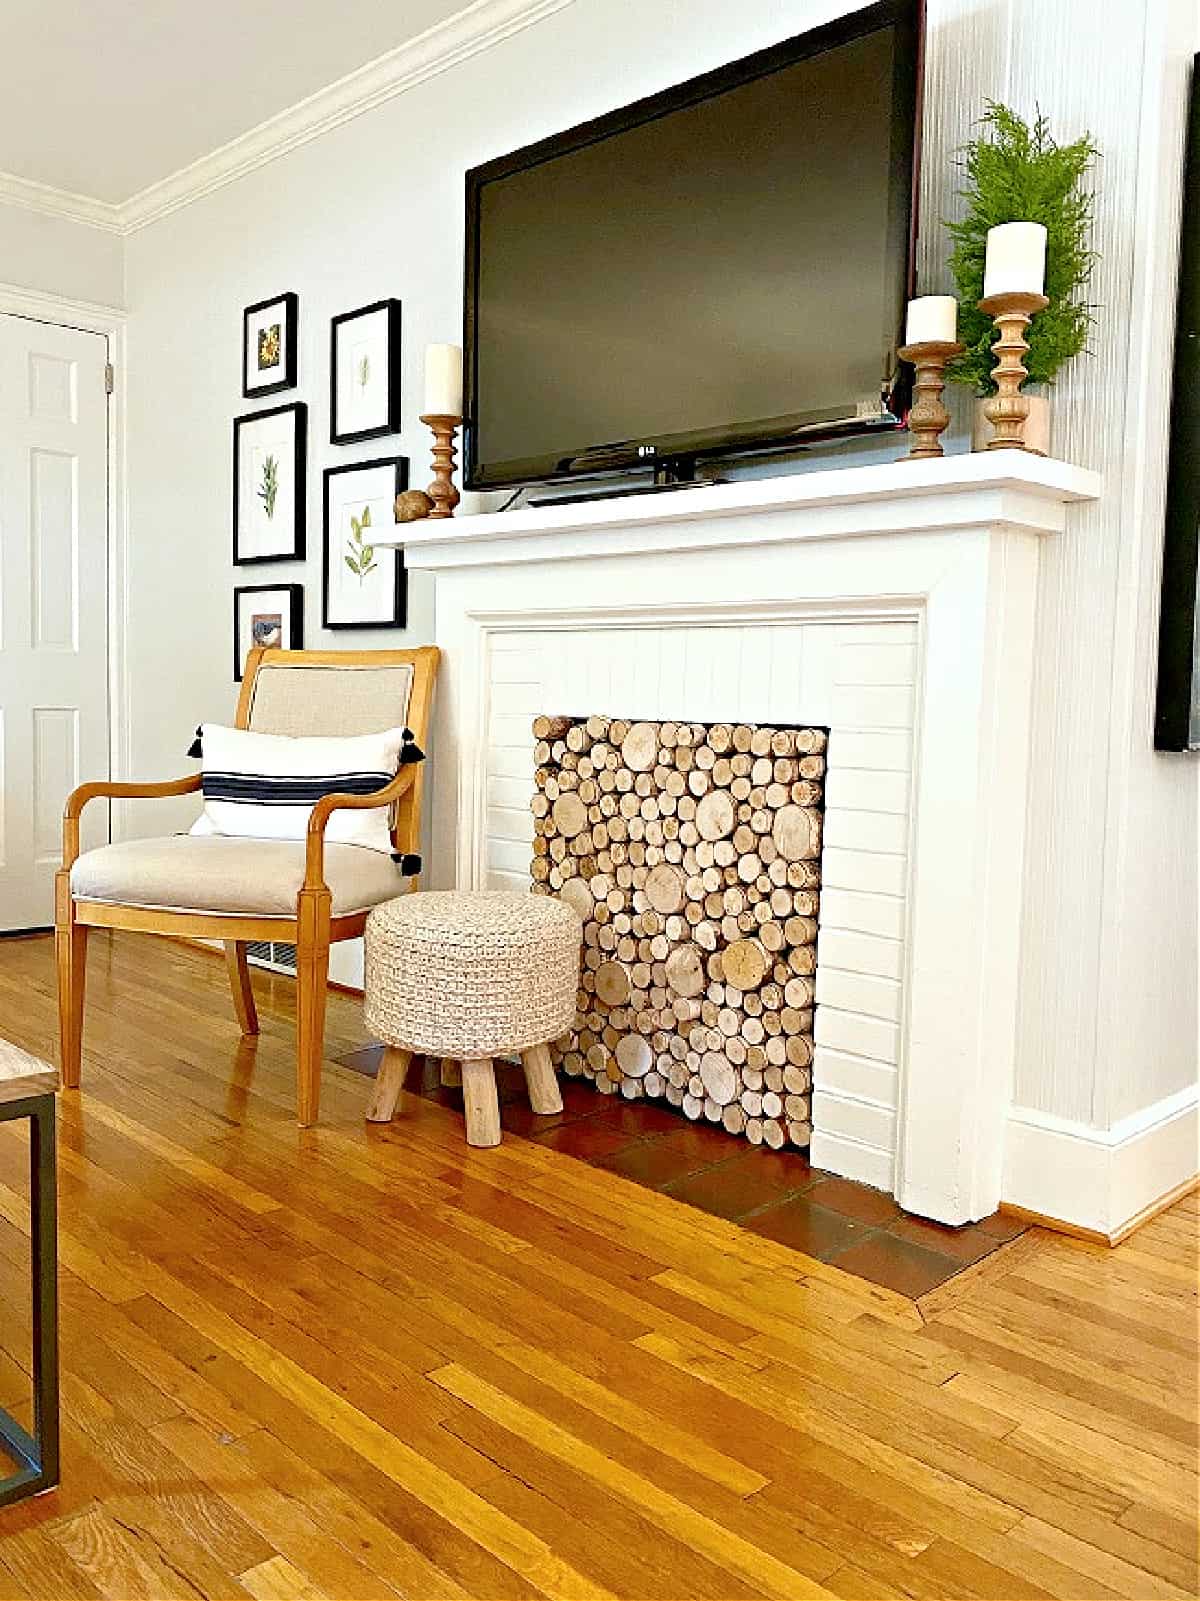 fireplace in living room